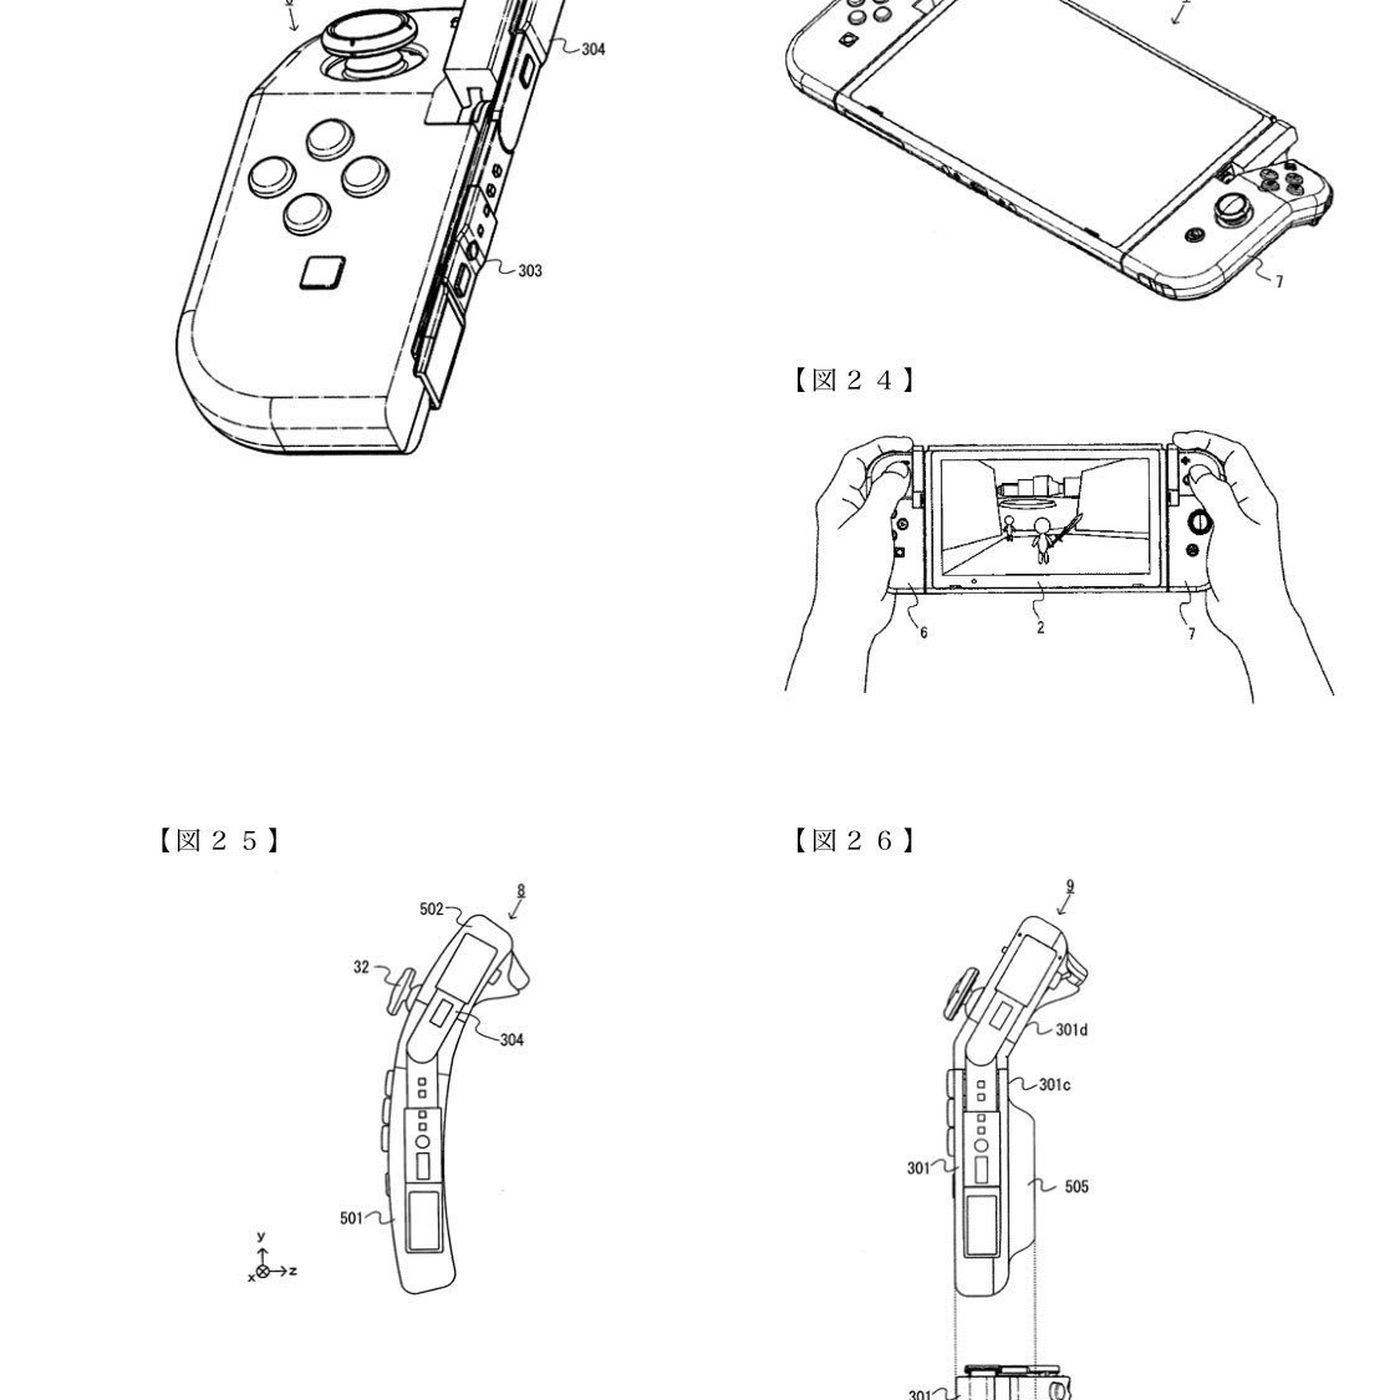 Nintendo files weird patent for hinged Joy-Cons - Polygon